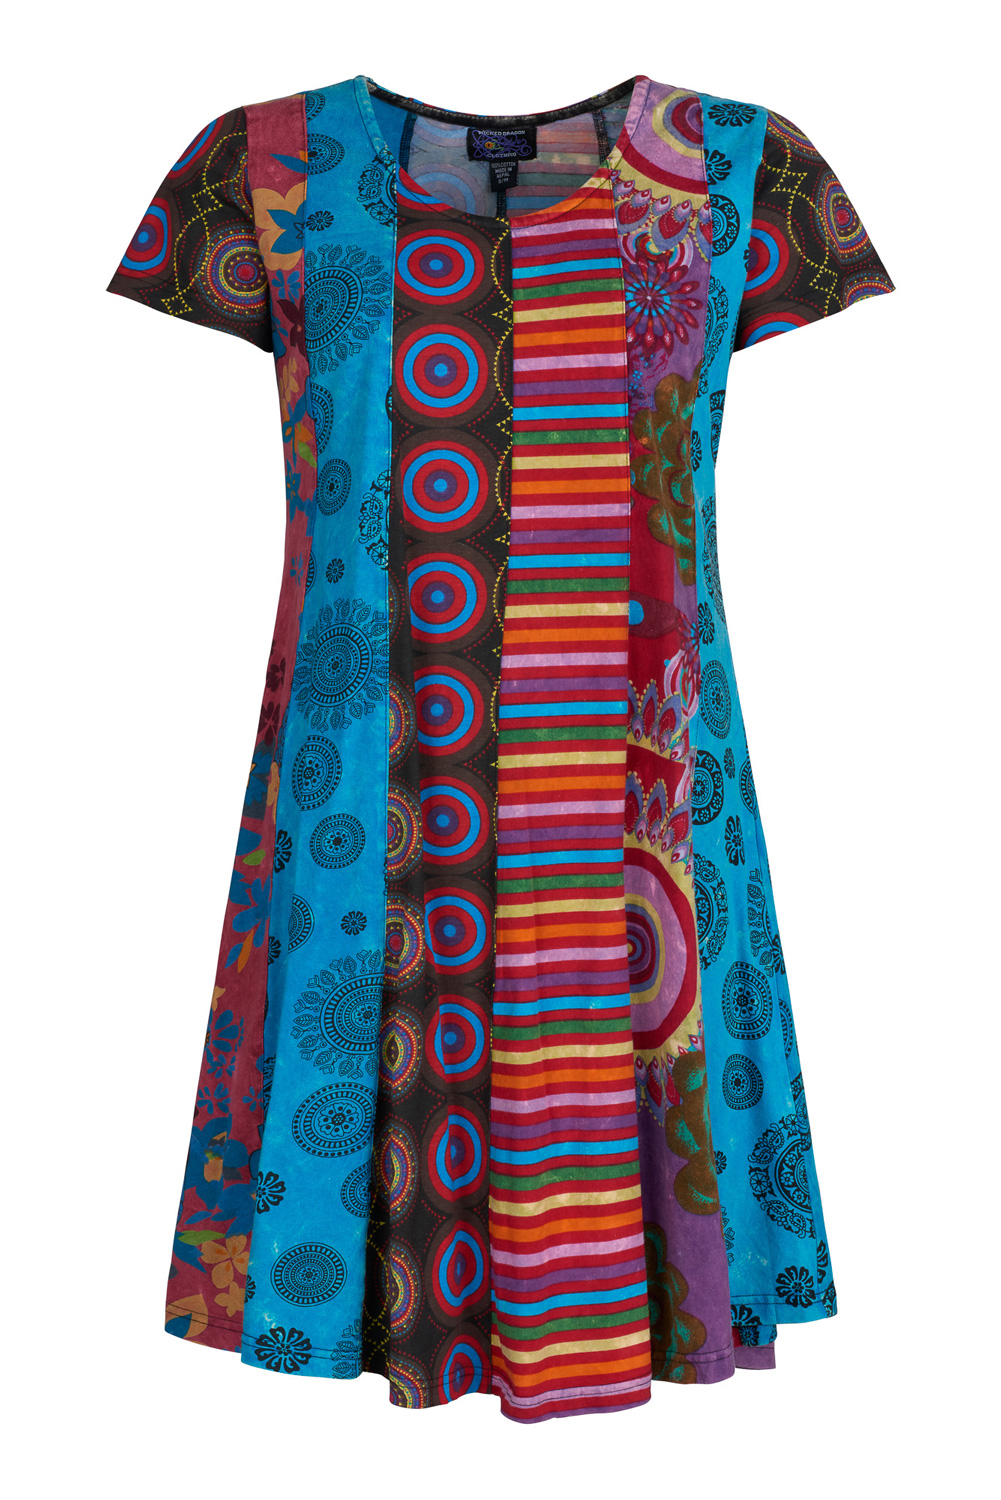 Patchwork flared dress with sleeves - S/M & M/L only